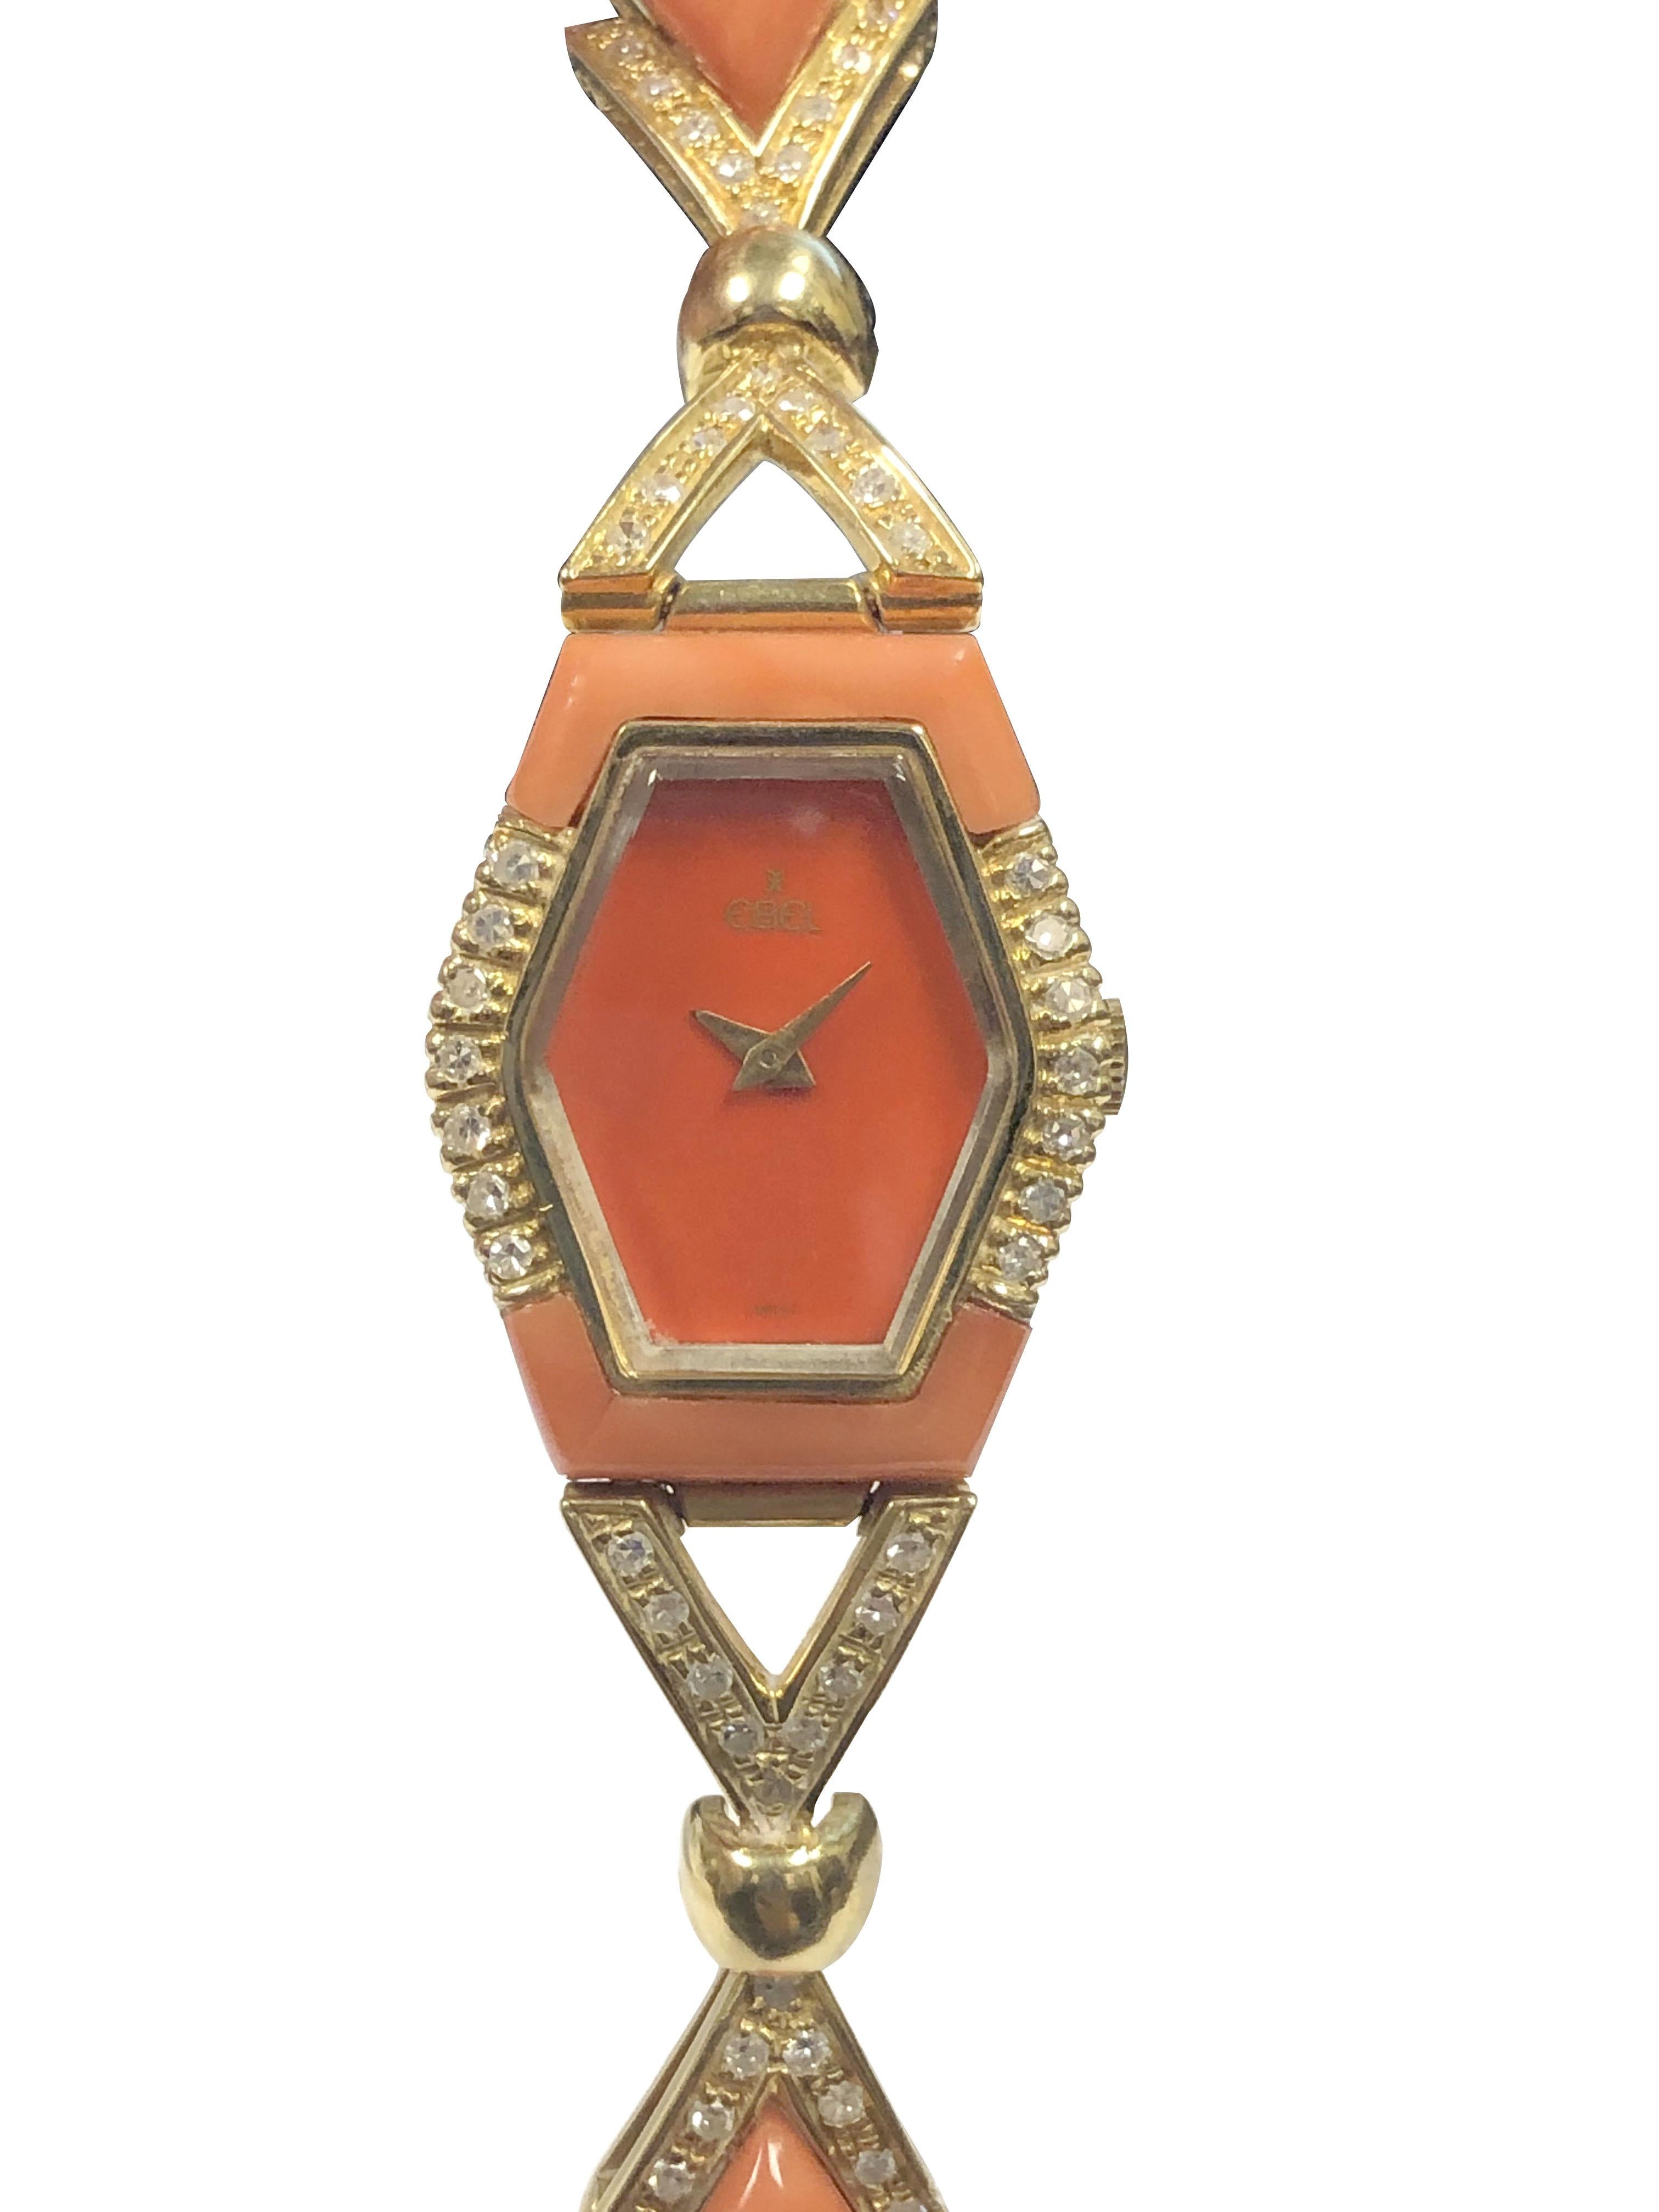 Circa 1970s Ebel Ladies Bracelet Wrist Watch, 27 X 23 M.M. 18K Yellow Gold case, 17 Jewel mechanical, manual wind movement, Coral dial with Gold hands, 5/8 inch wide 18K Yellow Gold Bracelet set with thick pieces of Orange - Red Coral and further